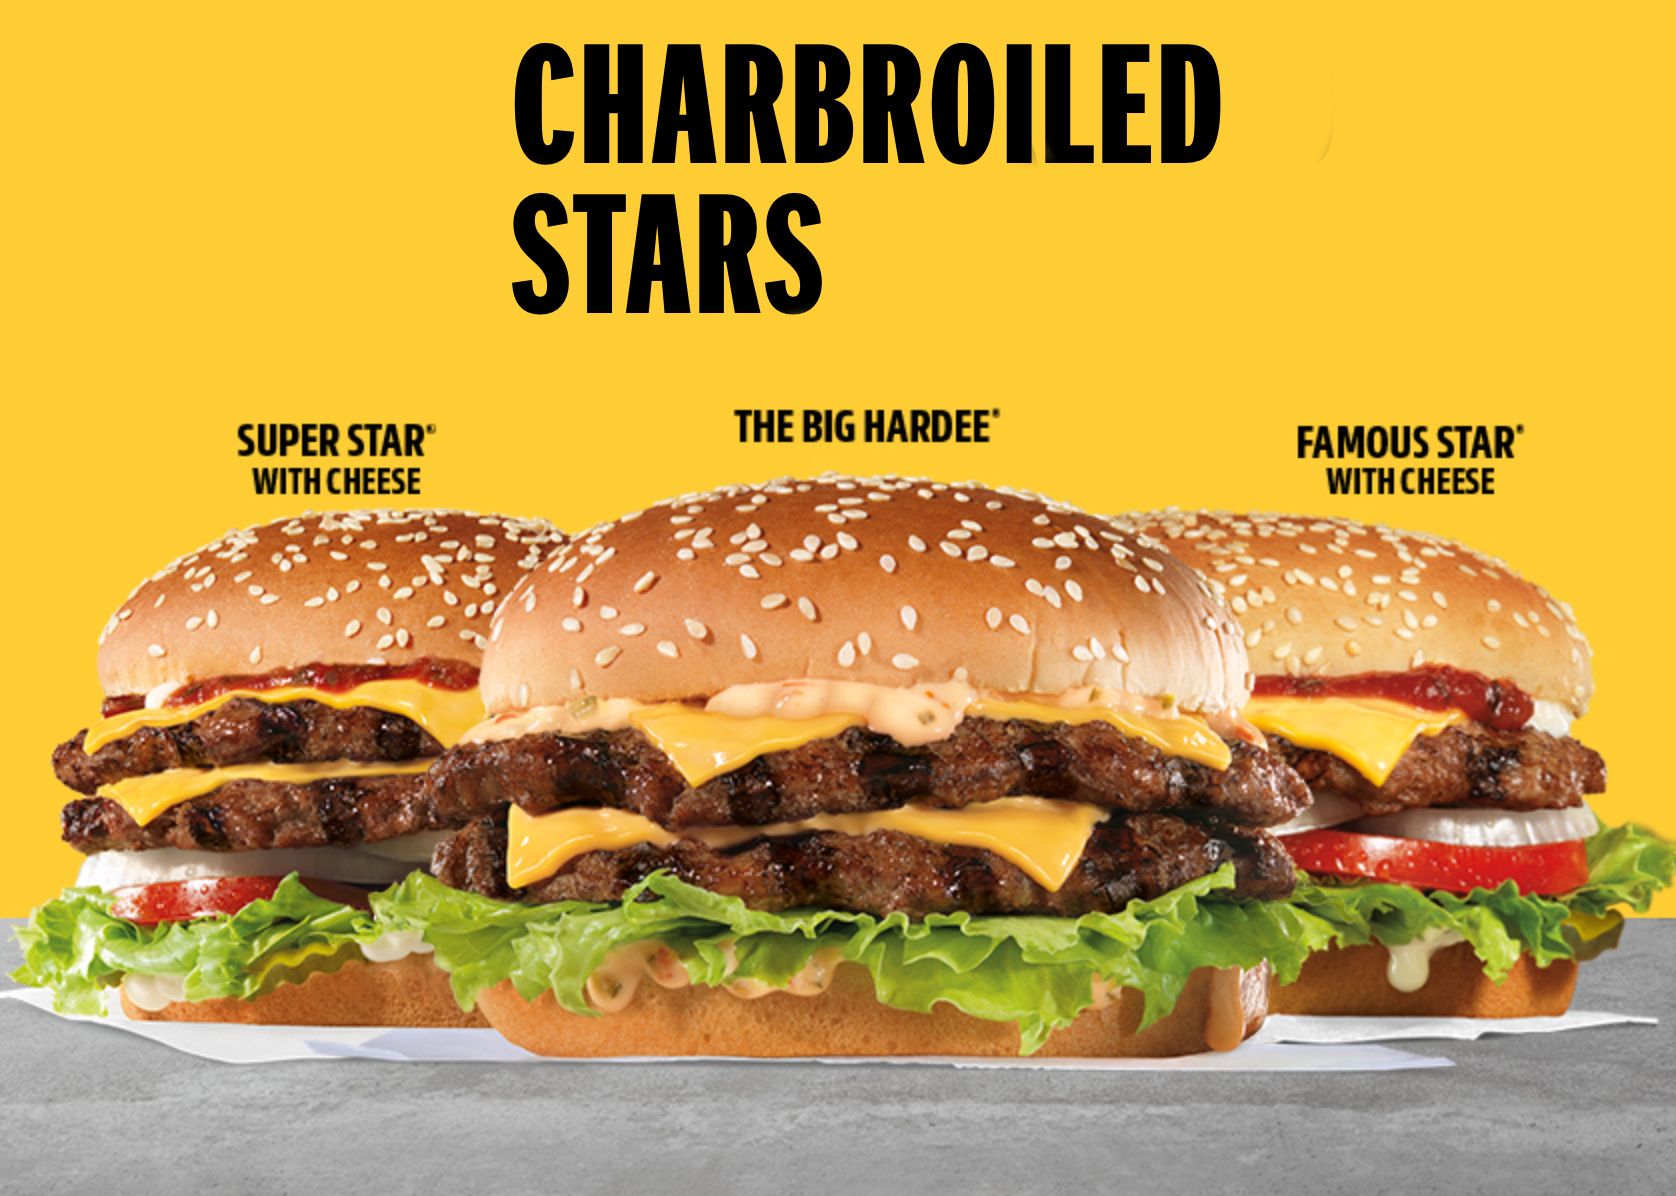 New Charbroiled Stars Cheeseburgers Now Available from Hardee's